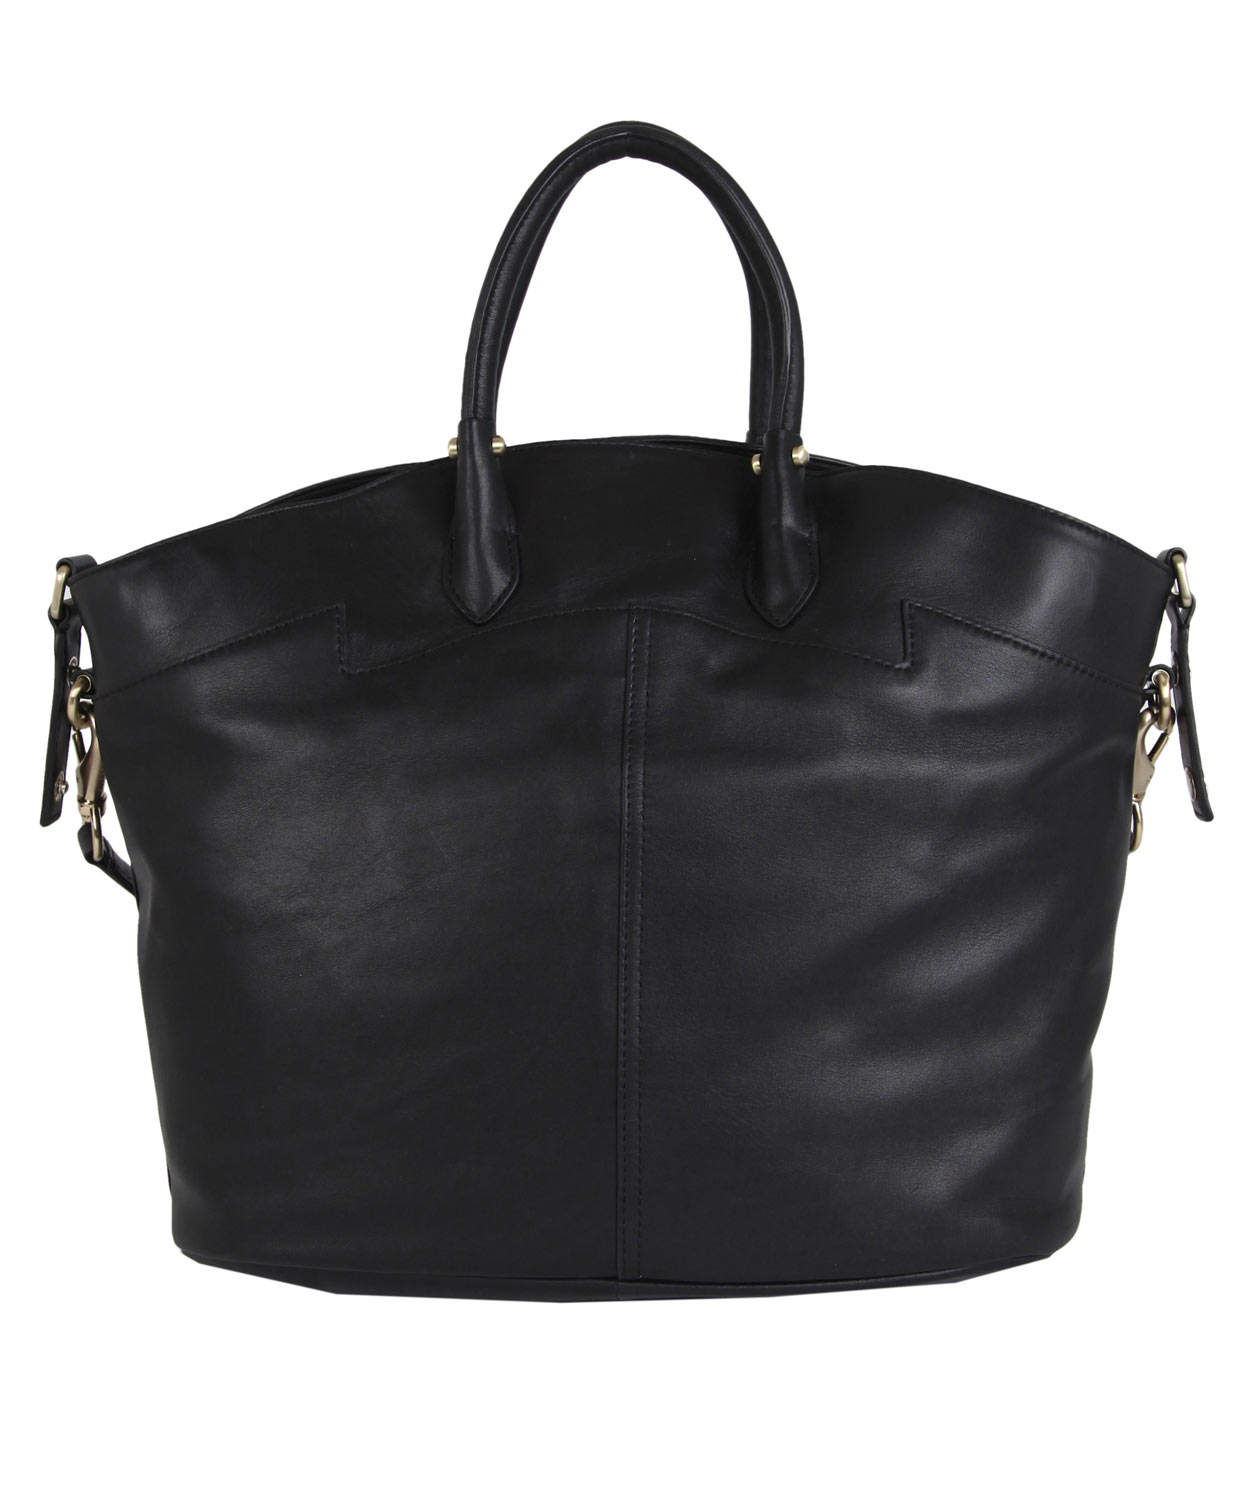 Lyst - Givenchy Large Black Leather Tote Bag in Black